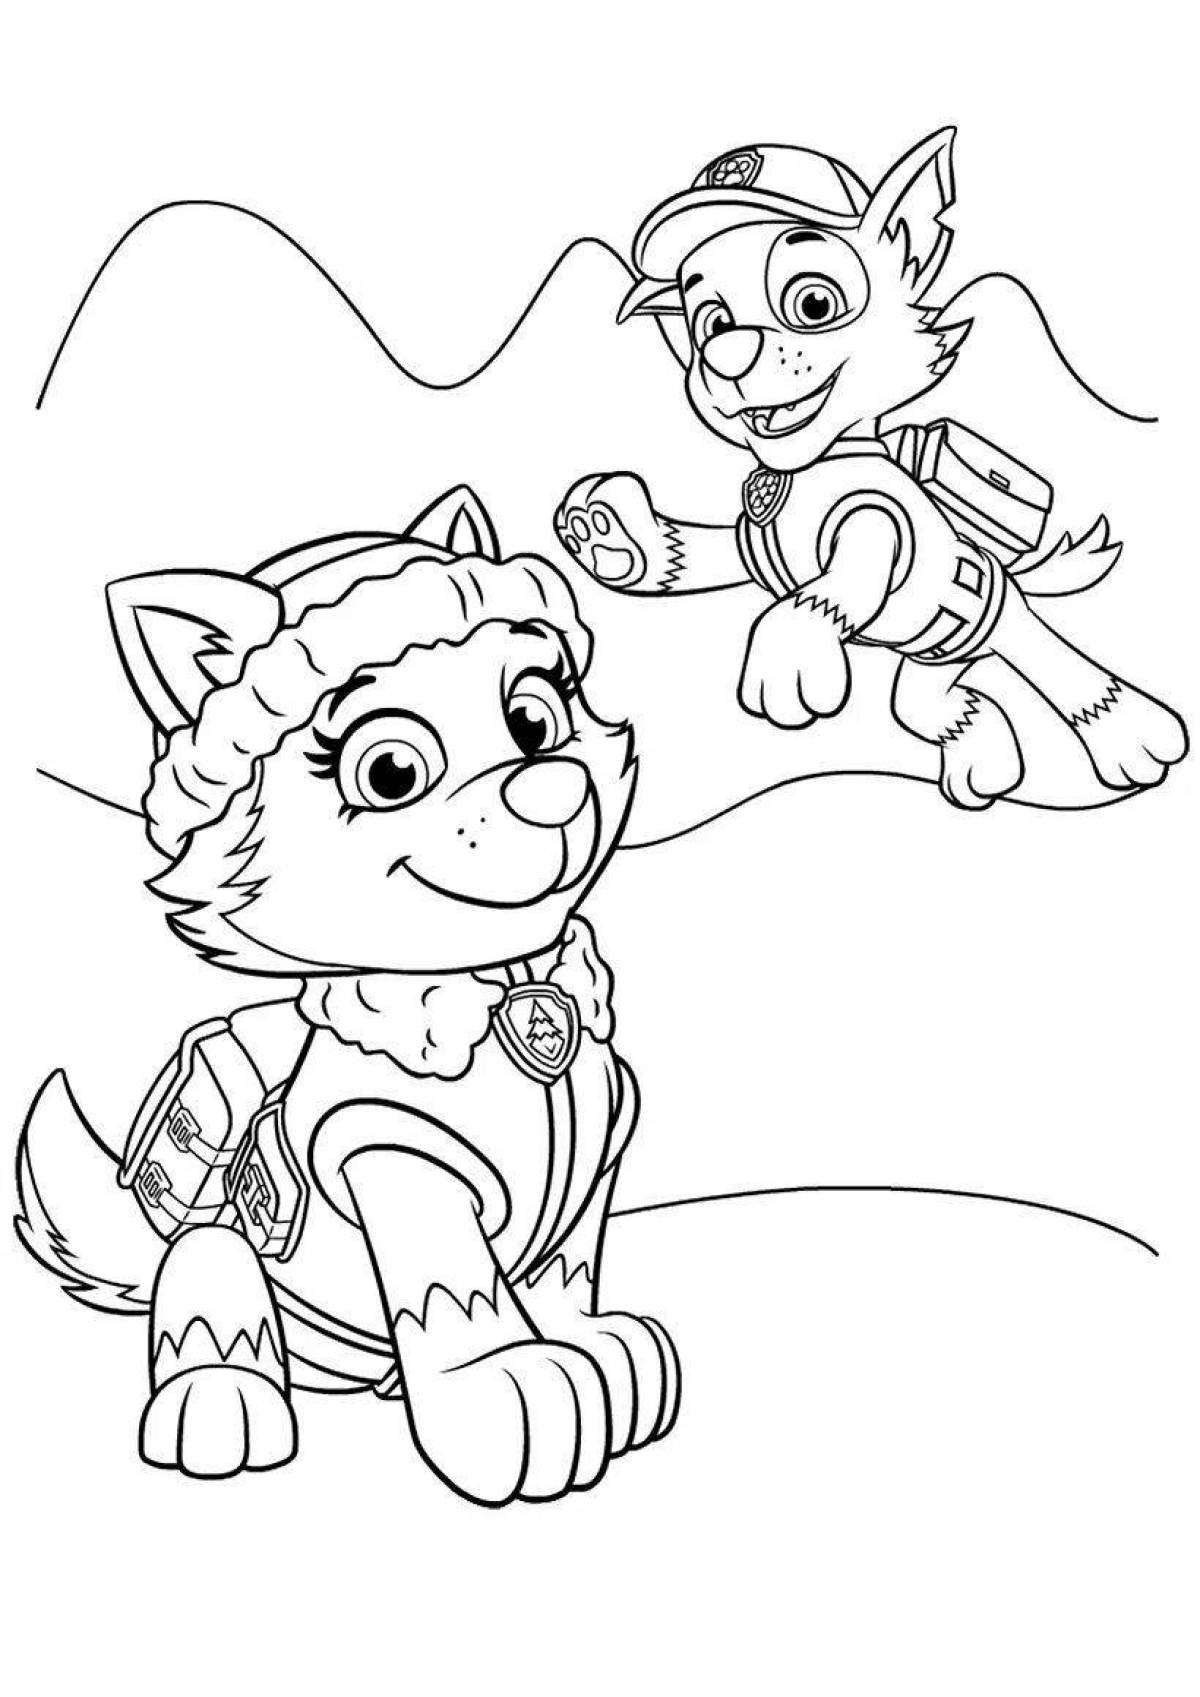 Coloring page mischievous Everest puppy